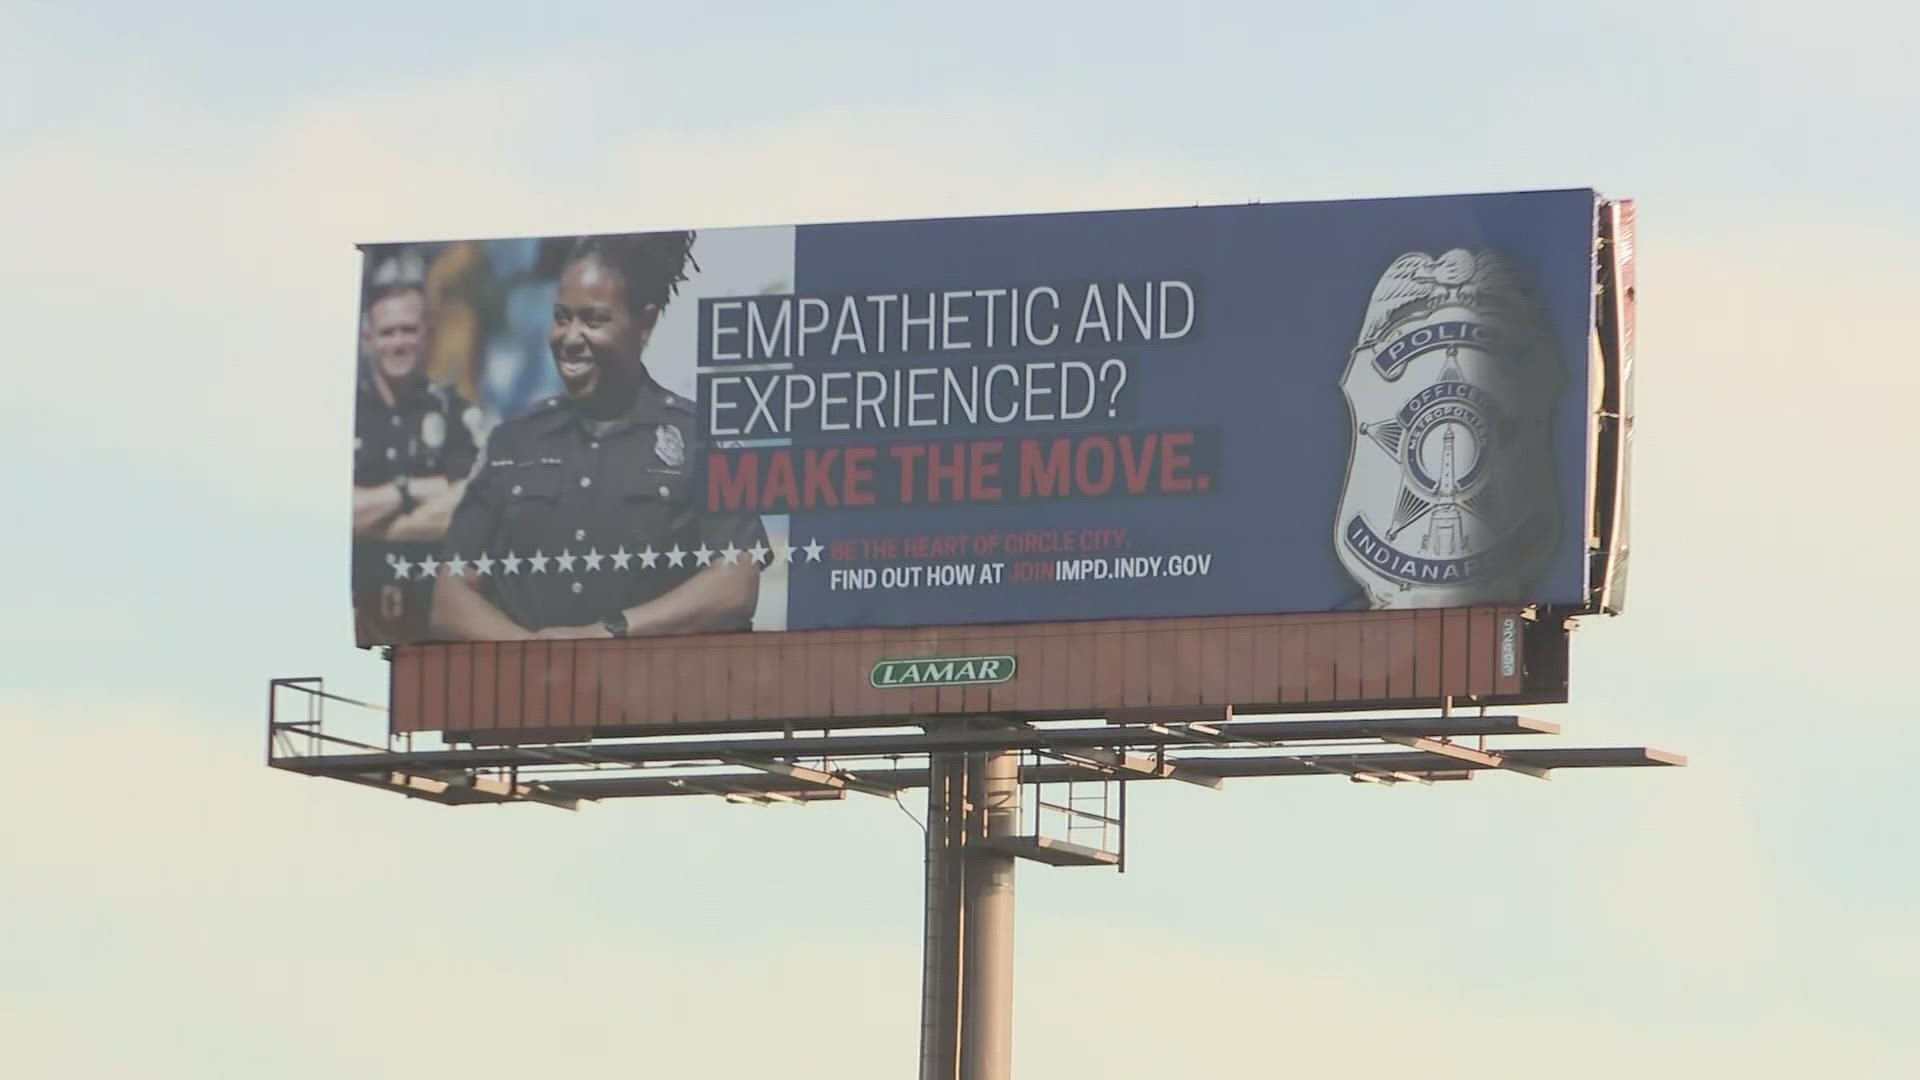 IMPD put up a billboard in Detroit, searching for new officers to come to the Circle City.